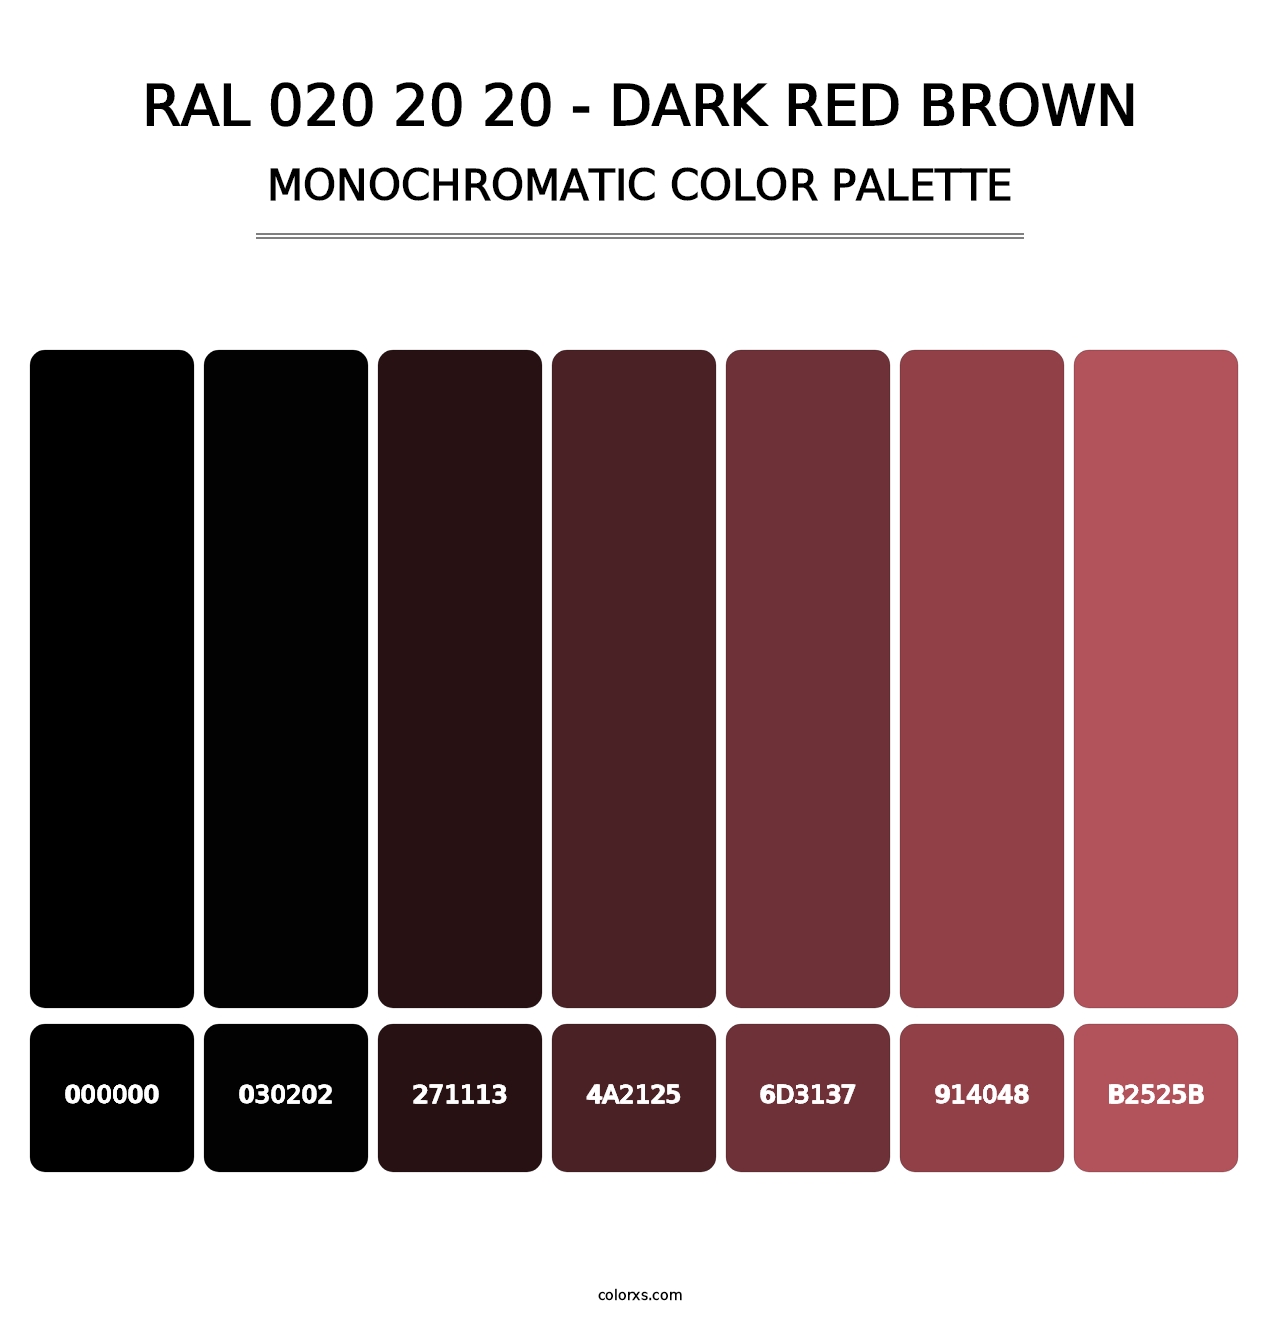 RAL 020 20 20 - Dark Red Brown - Monochromatic Color Palette